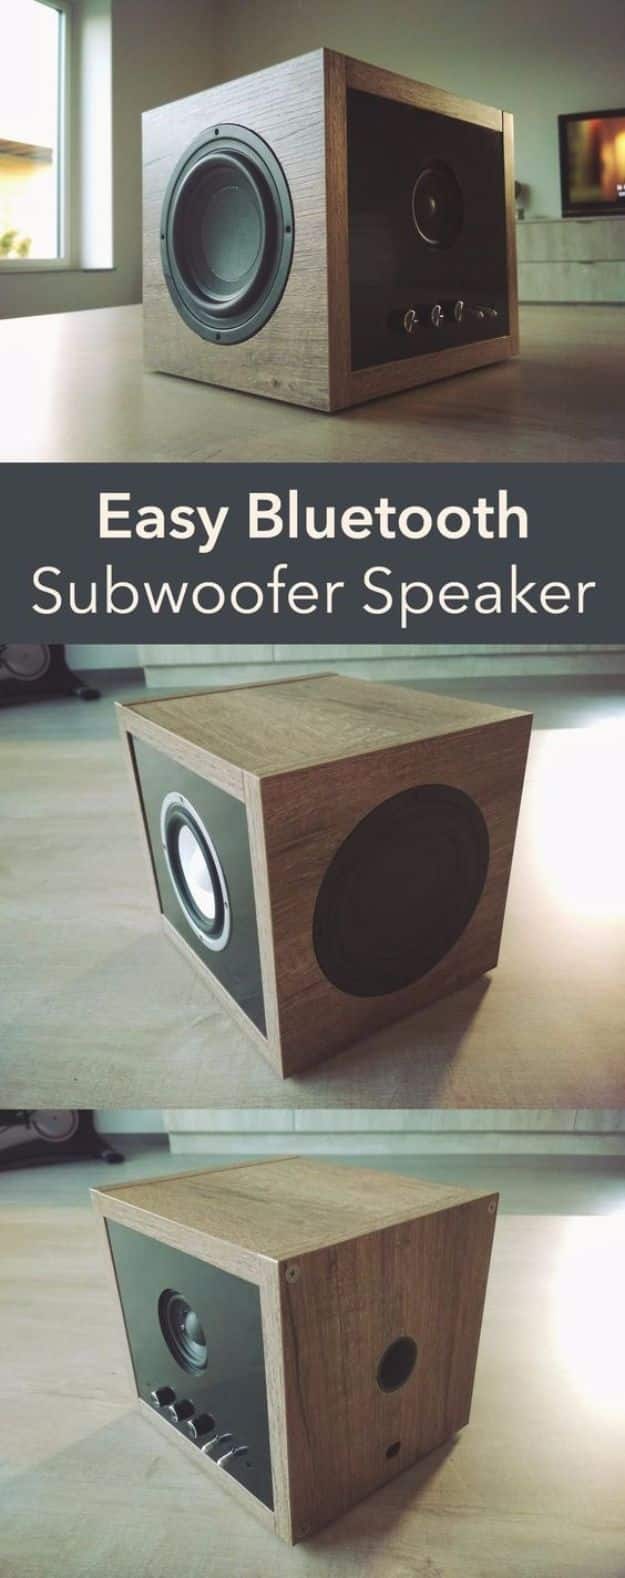 DIY Gadgets - Easy Bluetooth Subwoofer Speaker - Homemade Gadget Ideas and Projects for Men, Women, Teens and Kids - Steampunk Inventions, How To Build Easy Electronics, Cool Spy Gear and Do It Yourself Tech Toys #gadgets #diy #stem #diytoys